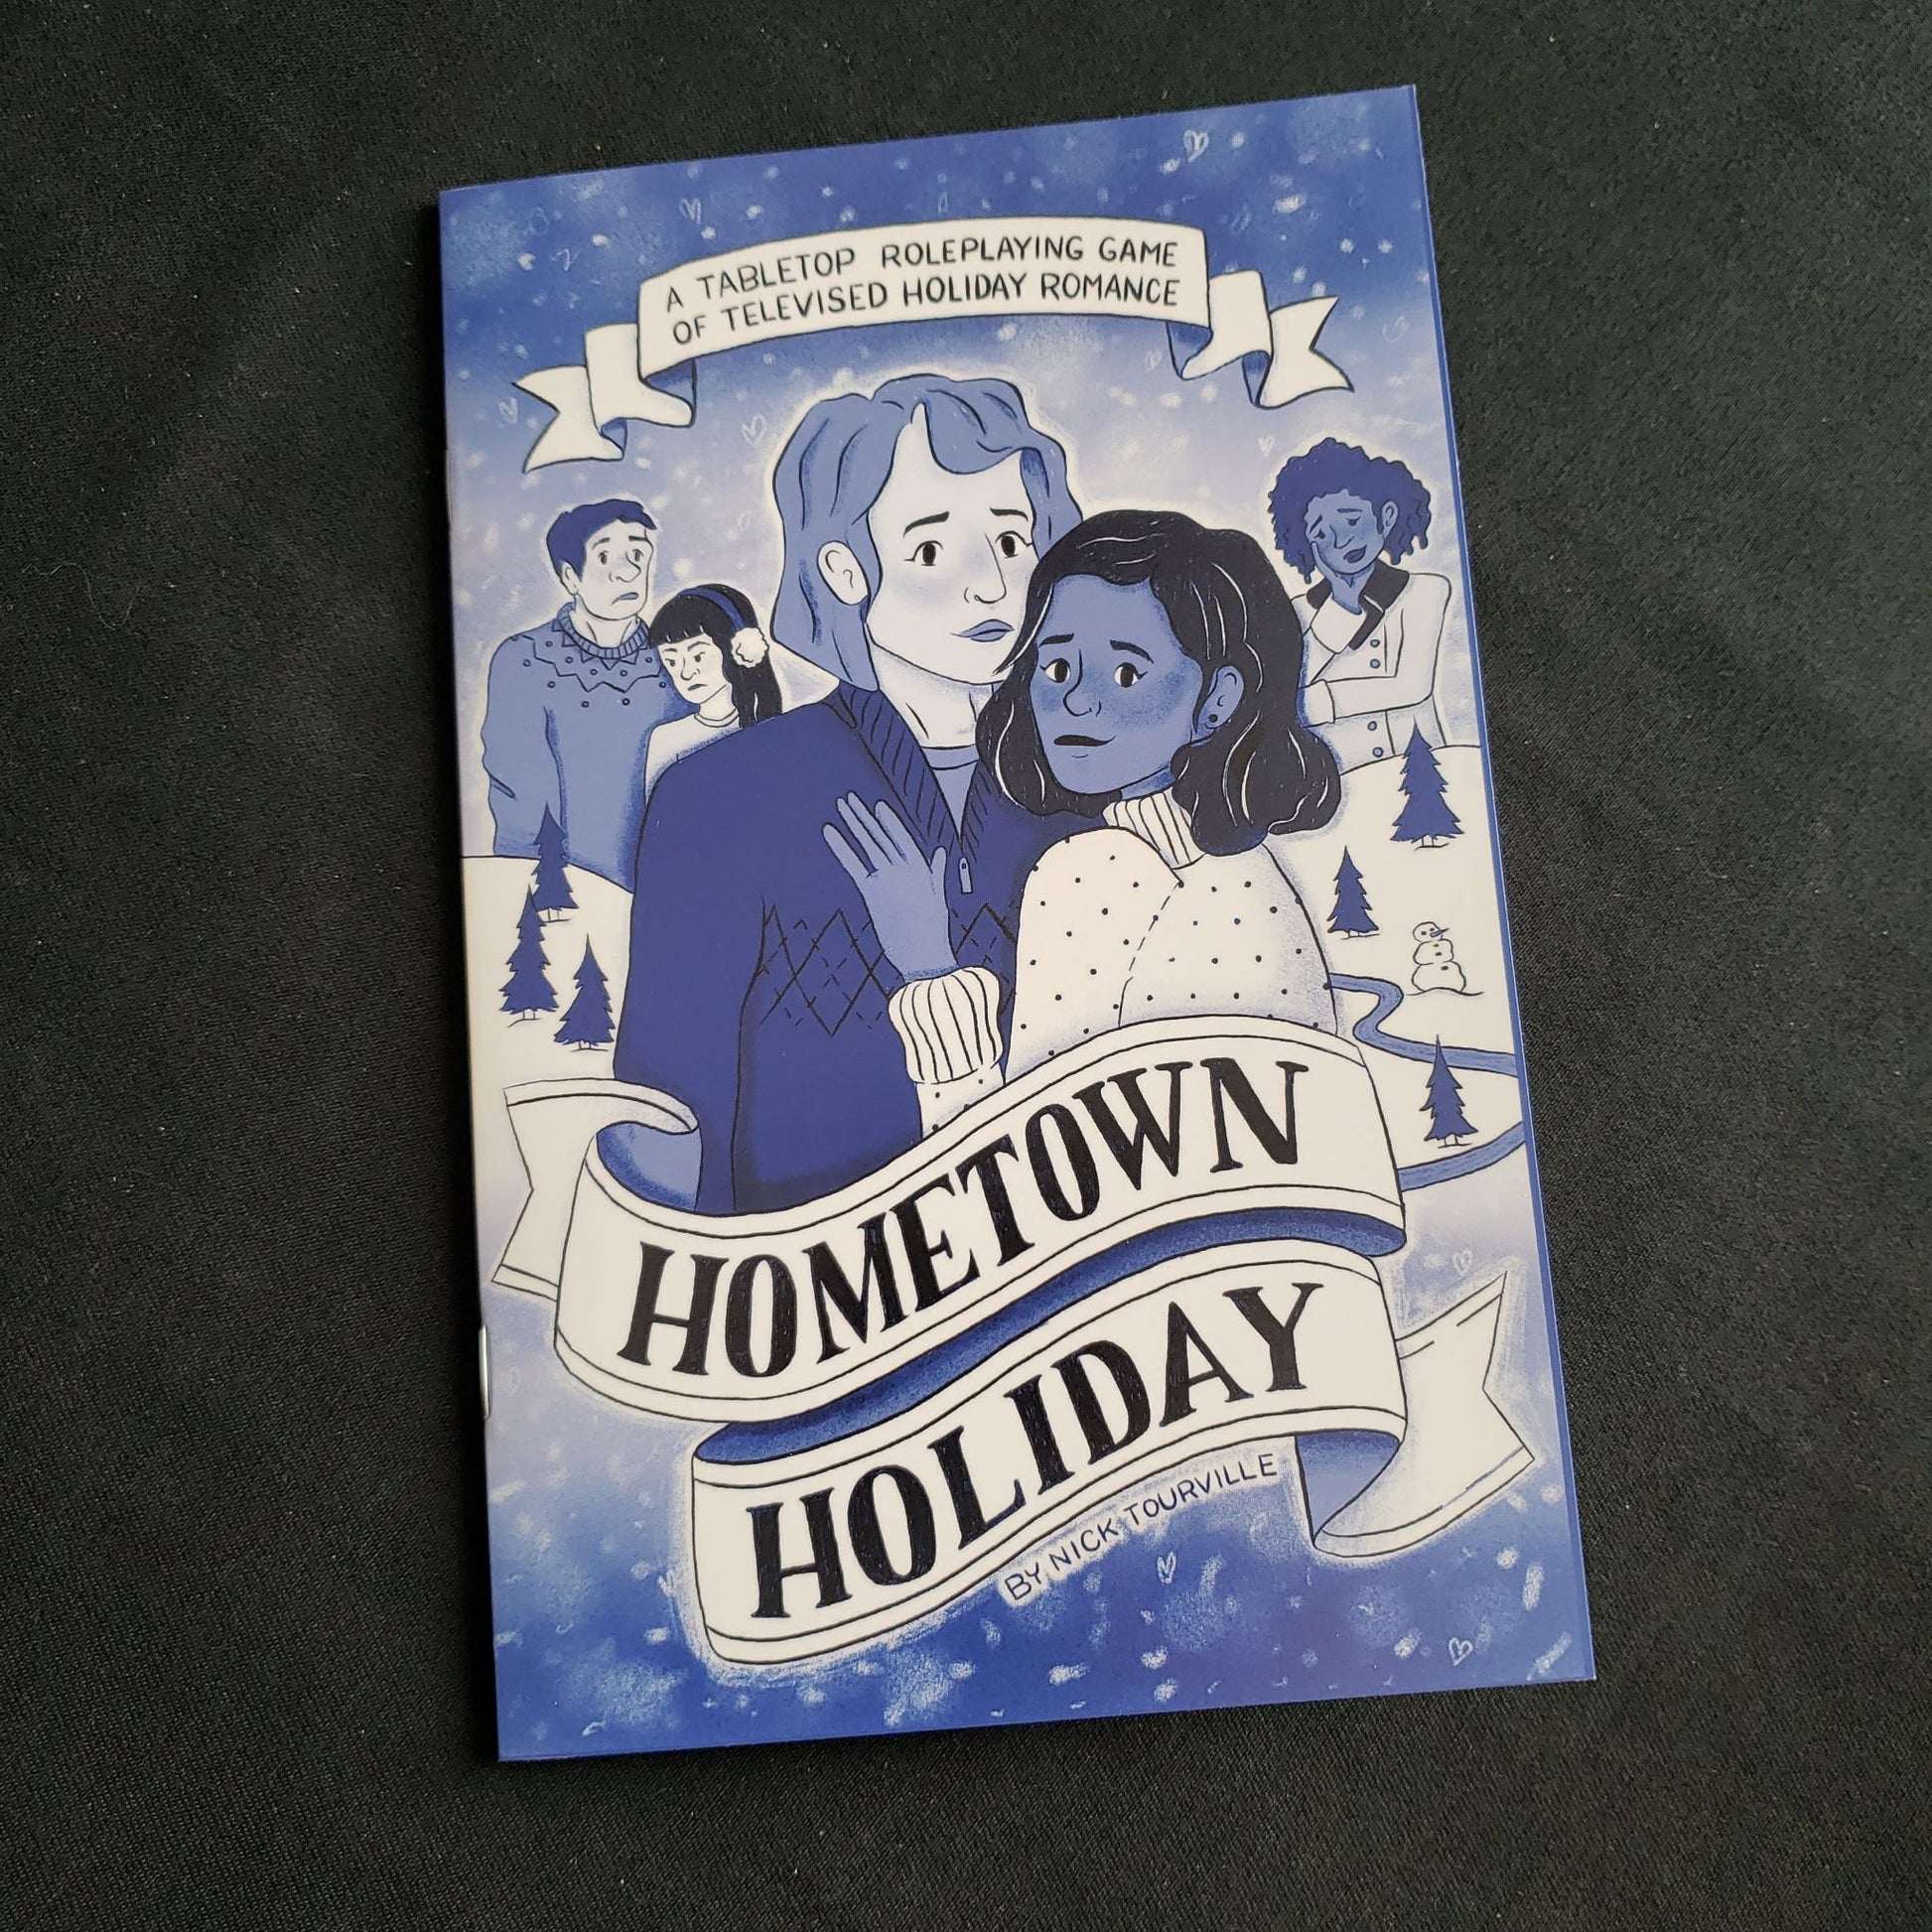 Image shows the front cover of the Hometown Holiday roleplaying game book